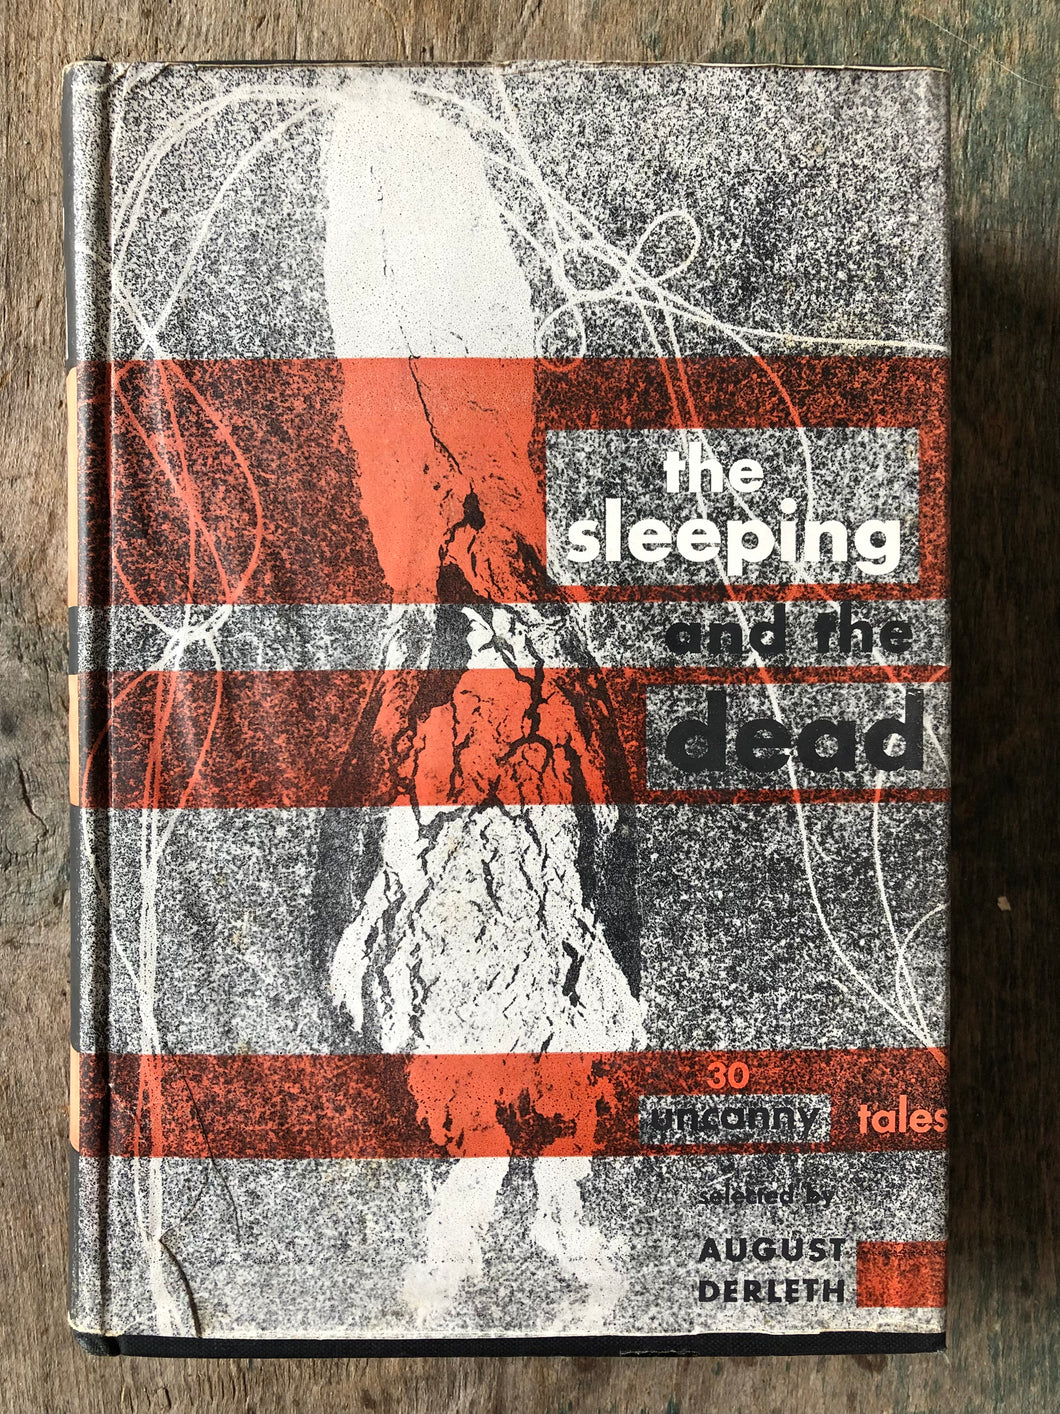 The Sleeping and the Dead: Thirty Uncanny Tales Selected by August Derleth